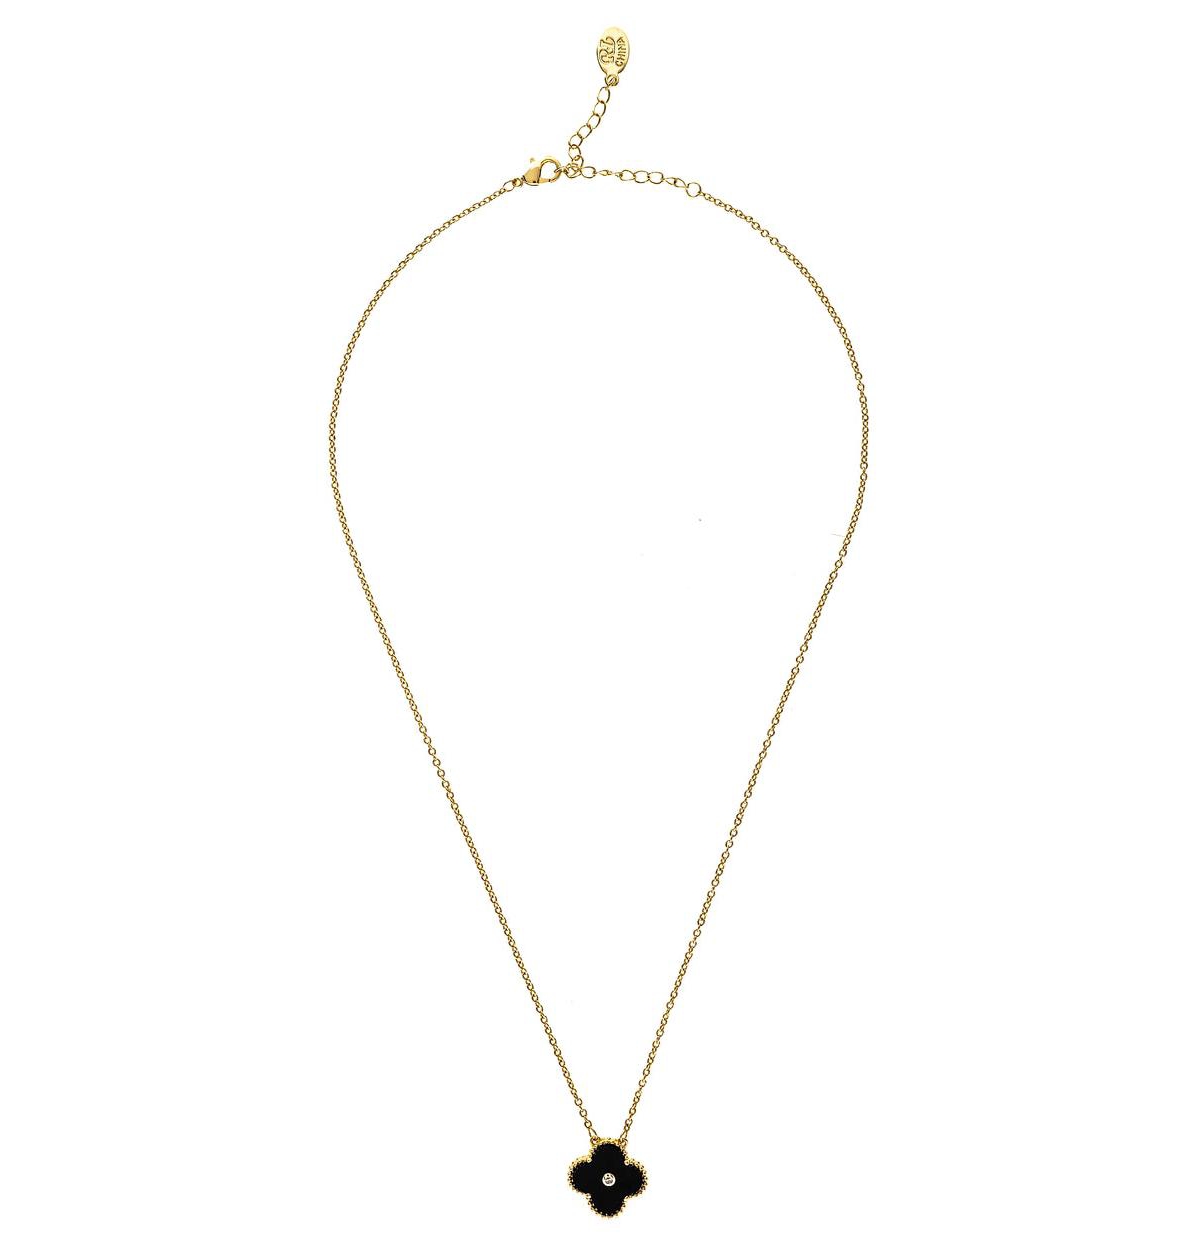 Onyx Clover and Cubic Zirconia Accent Necklace - Gold with black onyx